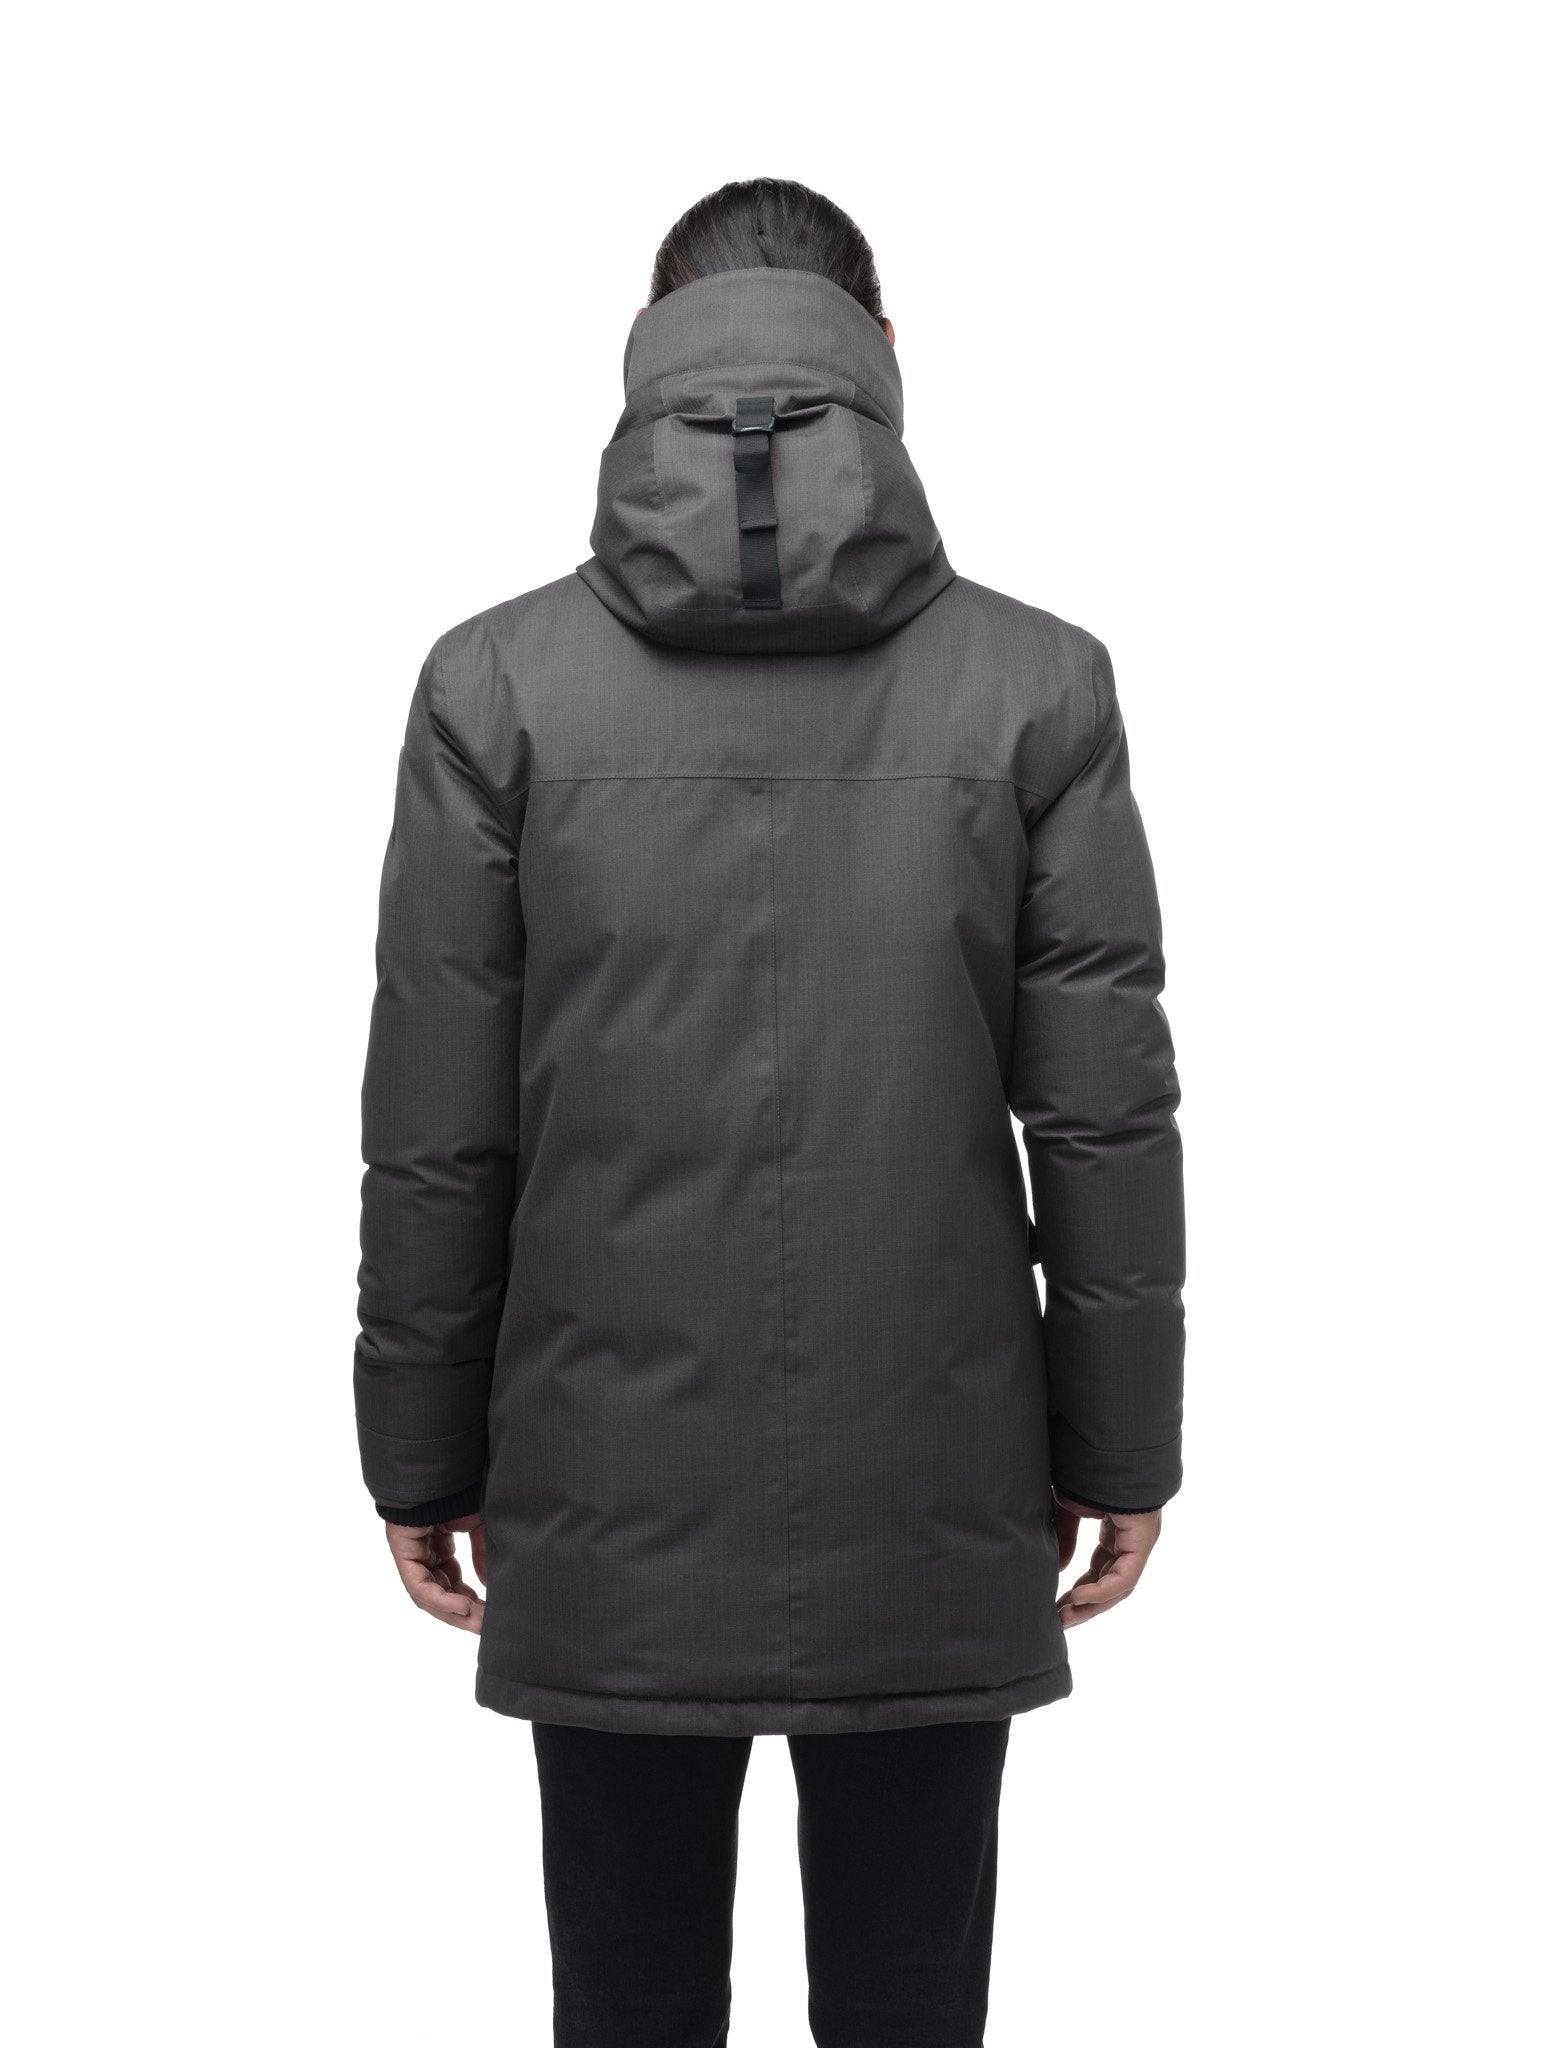 Men's thigh length down-filled parka with non-removable hood in Steel Grey